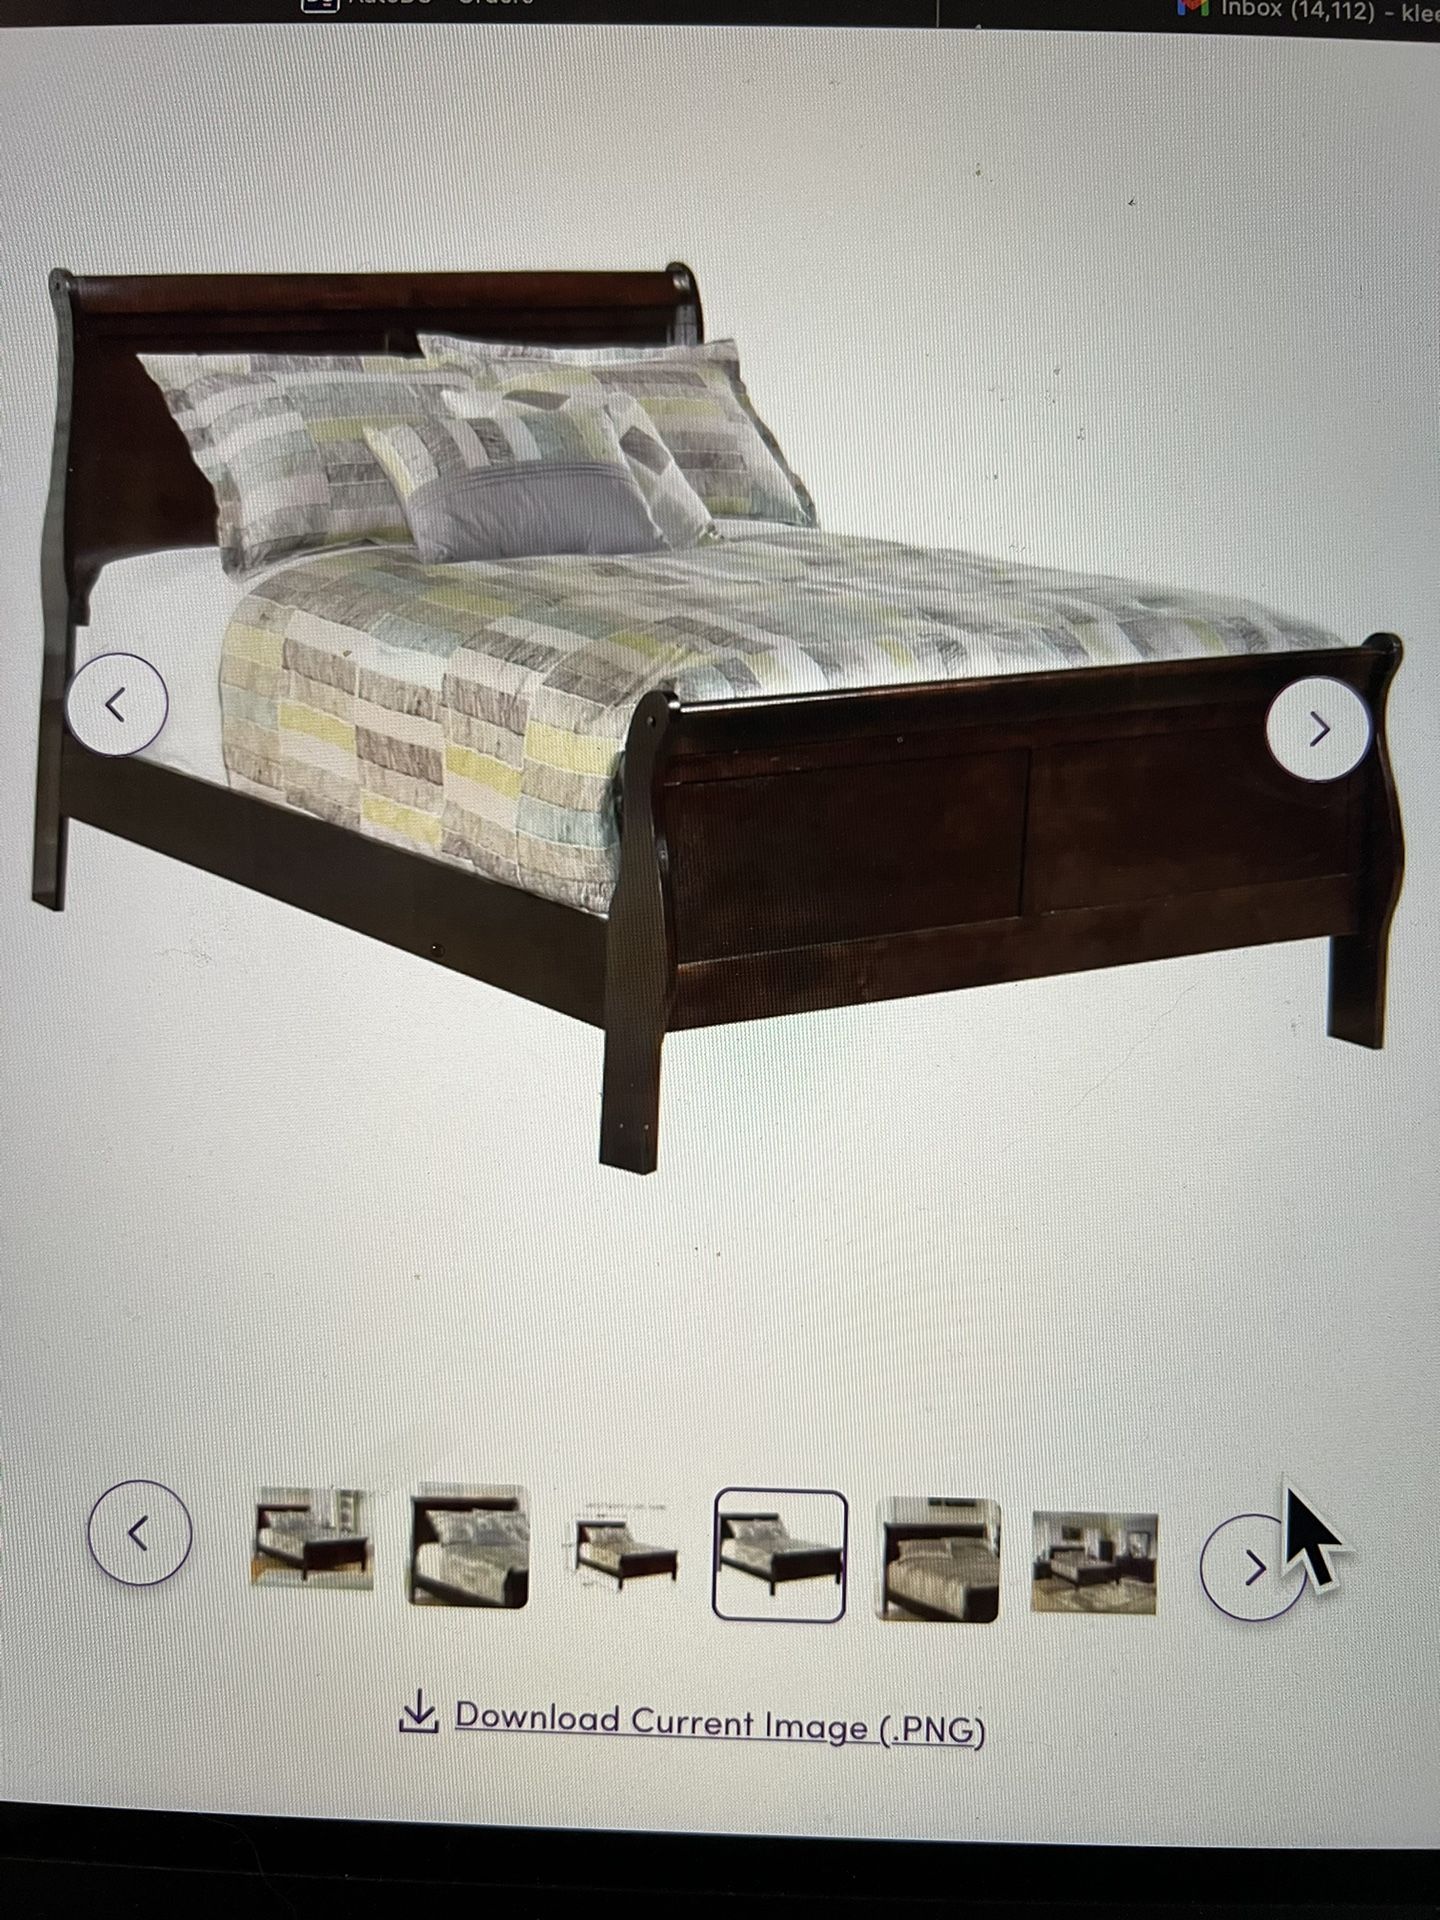 Full Size Sleigh Bed 